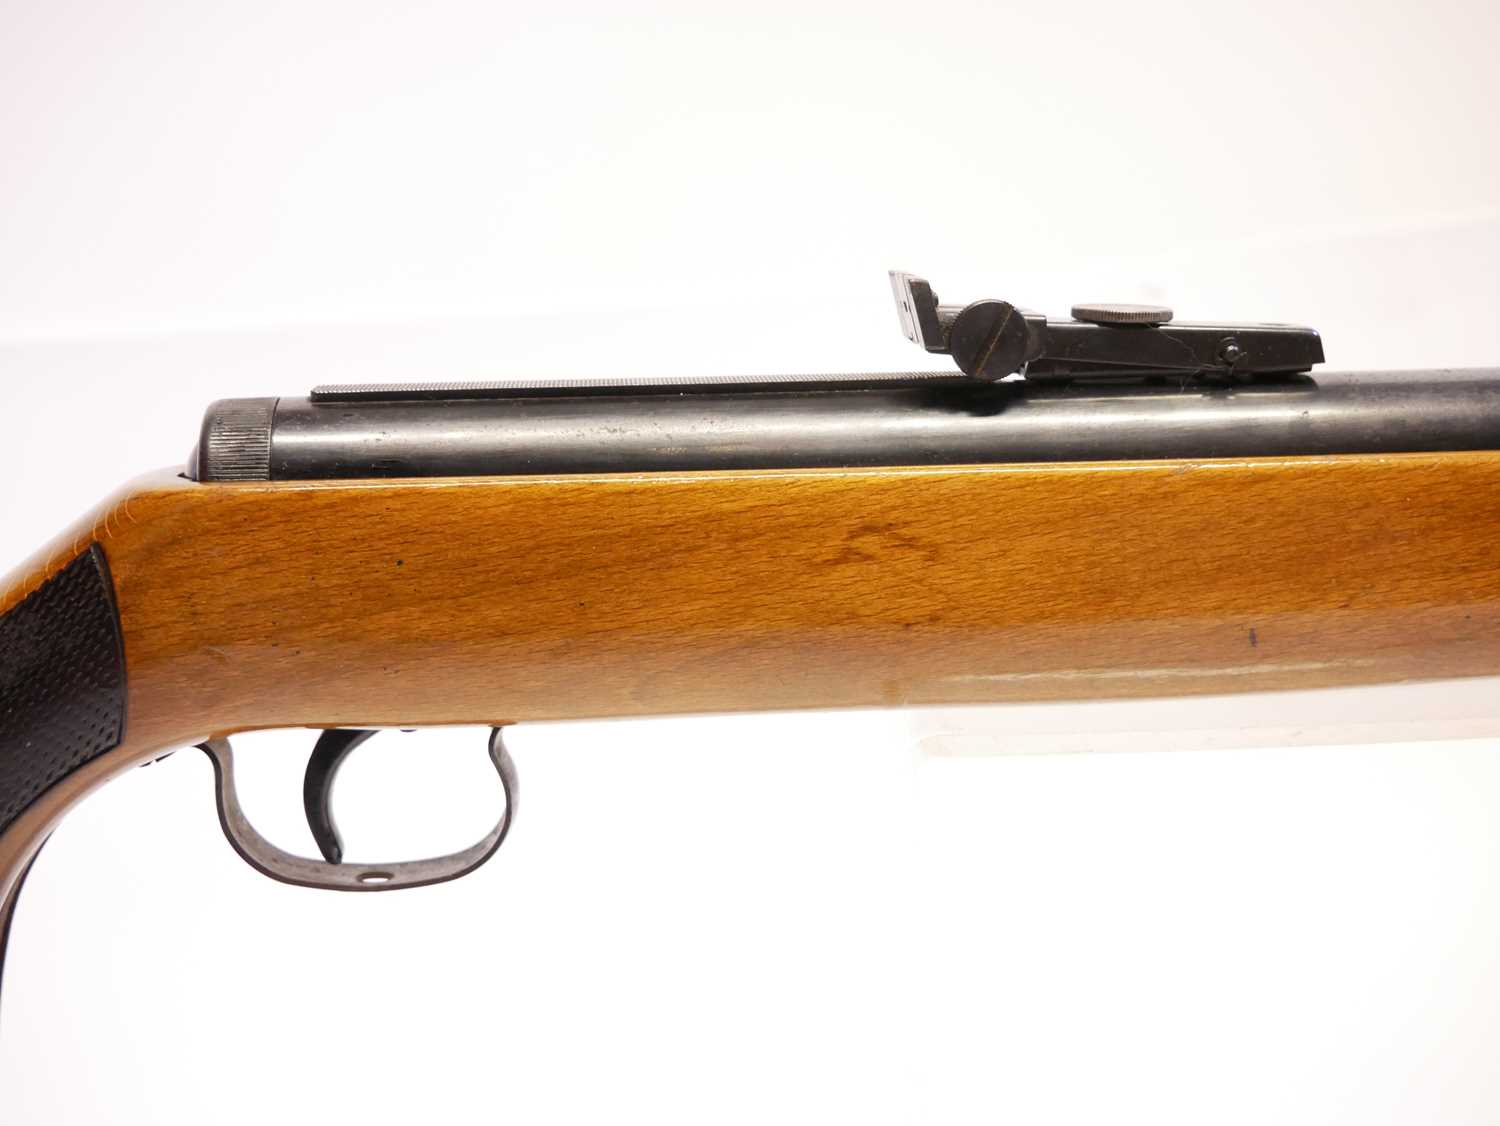 Original model 50 .22 air rifle, serial number 71371623, 18.5 inch barrel with tunnel front sight - Image 4 of 13